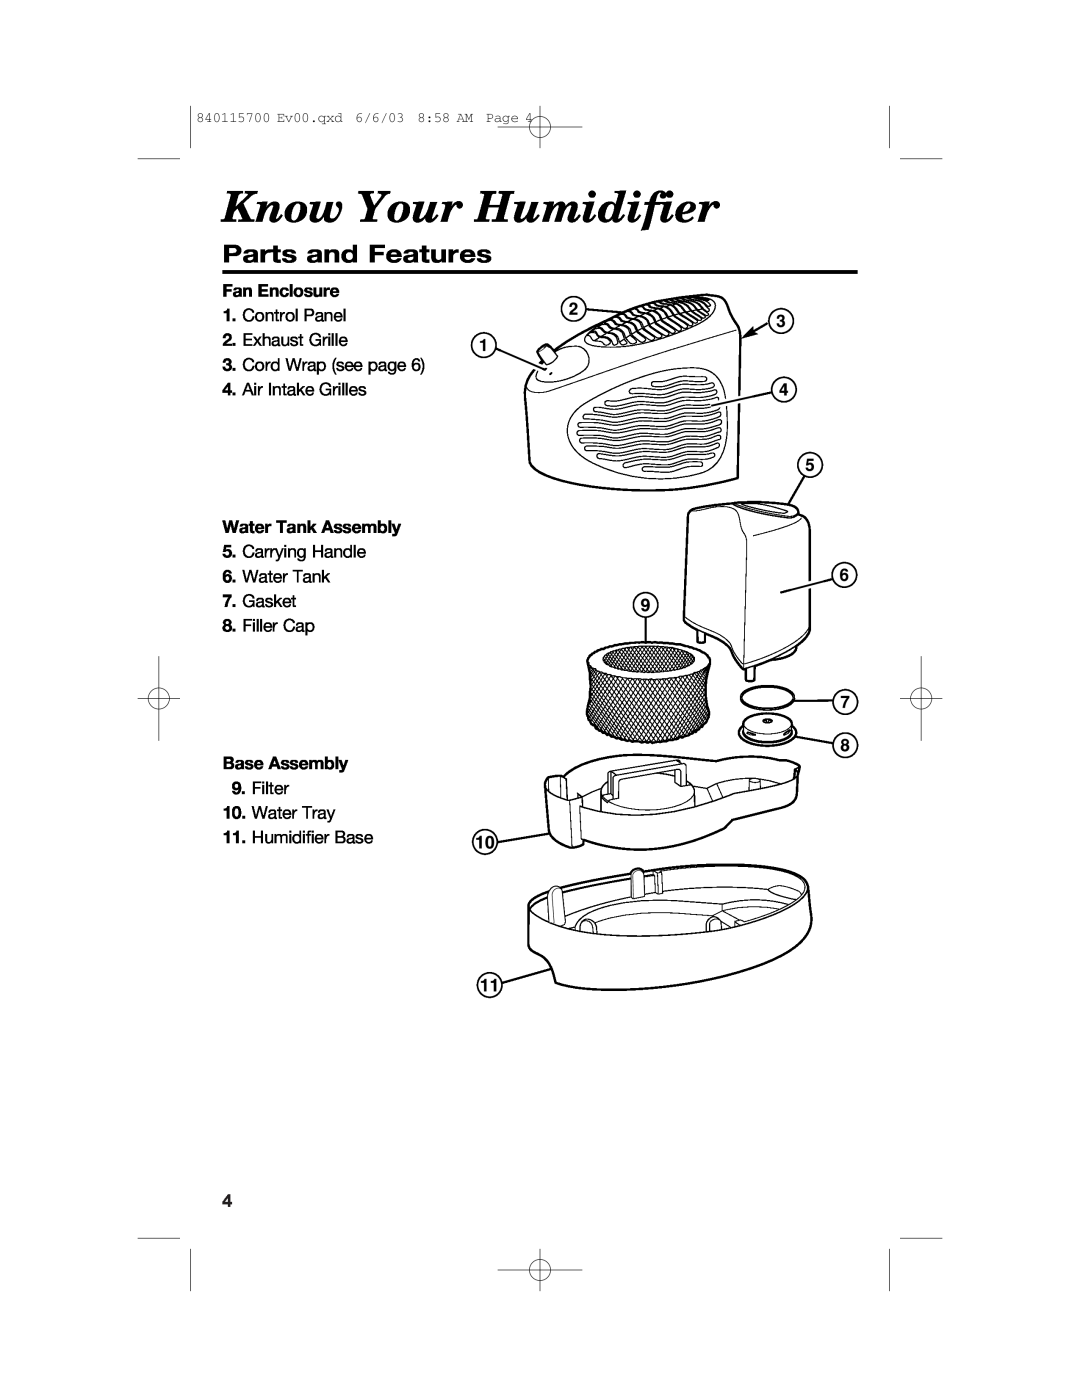 Hamilton Beach 05521C, 05520C Know Your Humidifier, Parts and Features, Fan Enclosure, Water Tank Assembly, Base Assembly 